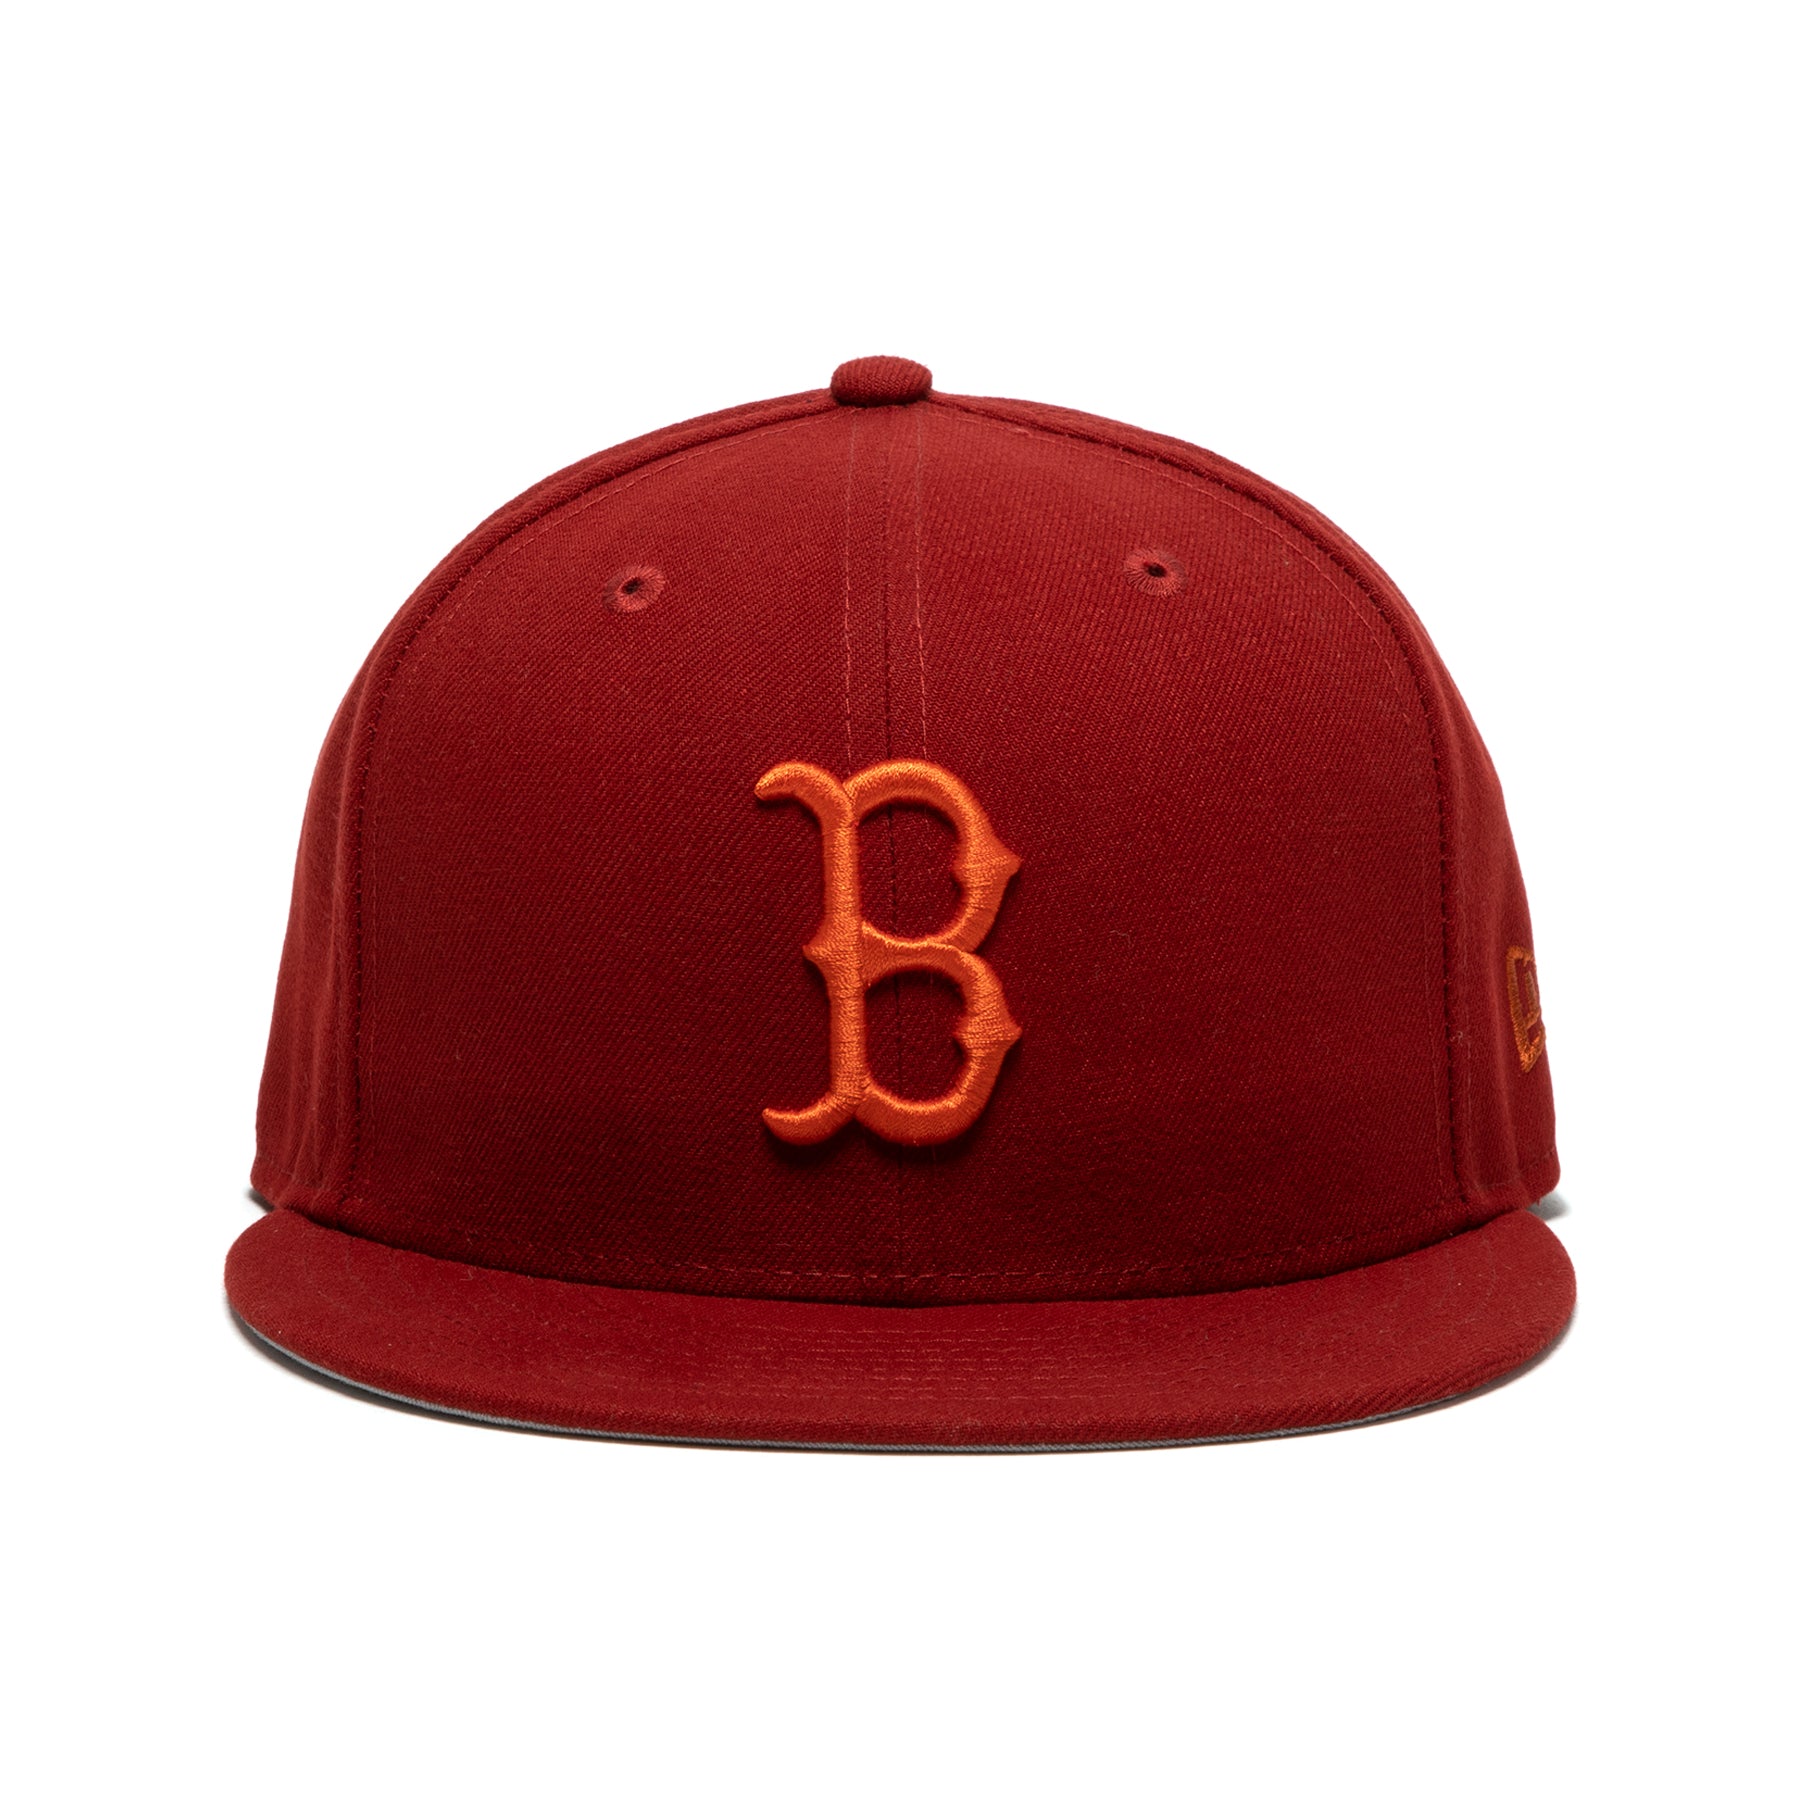 New Era, Accessories, Boston Red Sox Official Merchandise Hat